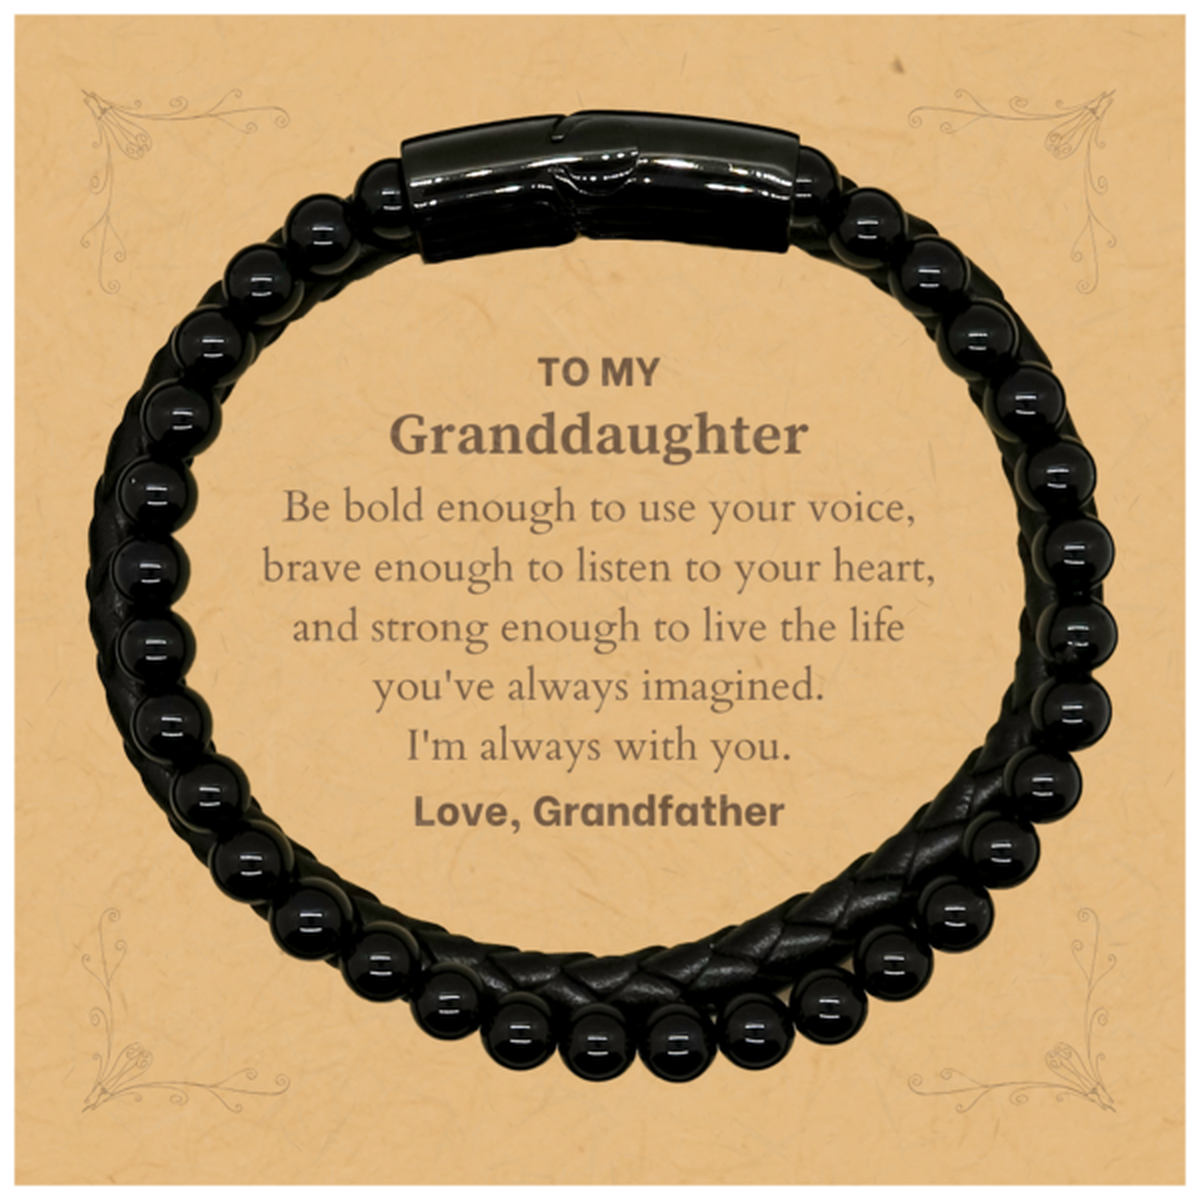 Keepsake Granddaughter Stone Leather Bracelets Gift Idea Graduation Christmas Birthday Granddaughter from Grandfather, Granddaughter Be bold enough to use your voice, brave enough to listen to your heart. Love, Grandfather